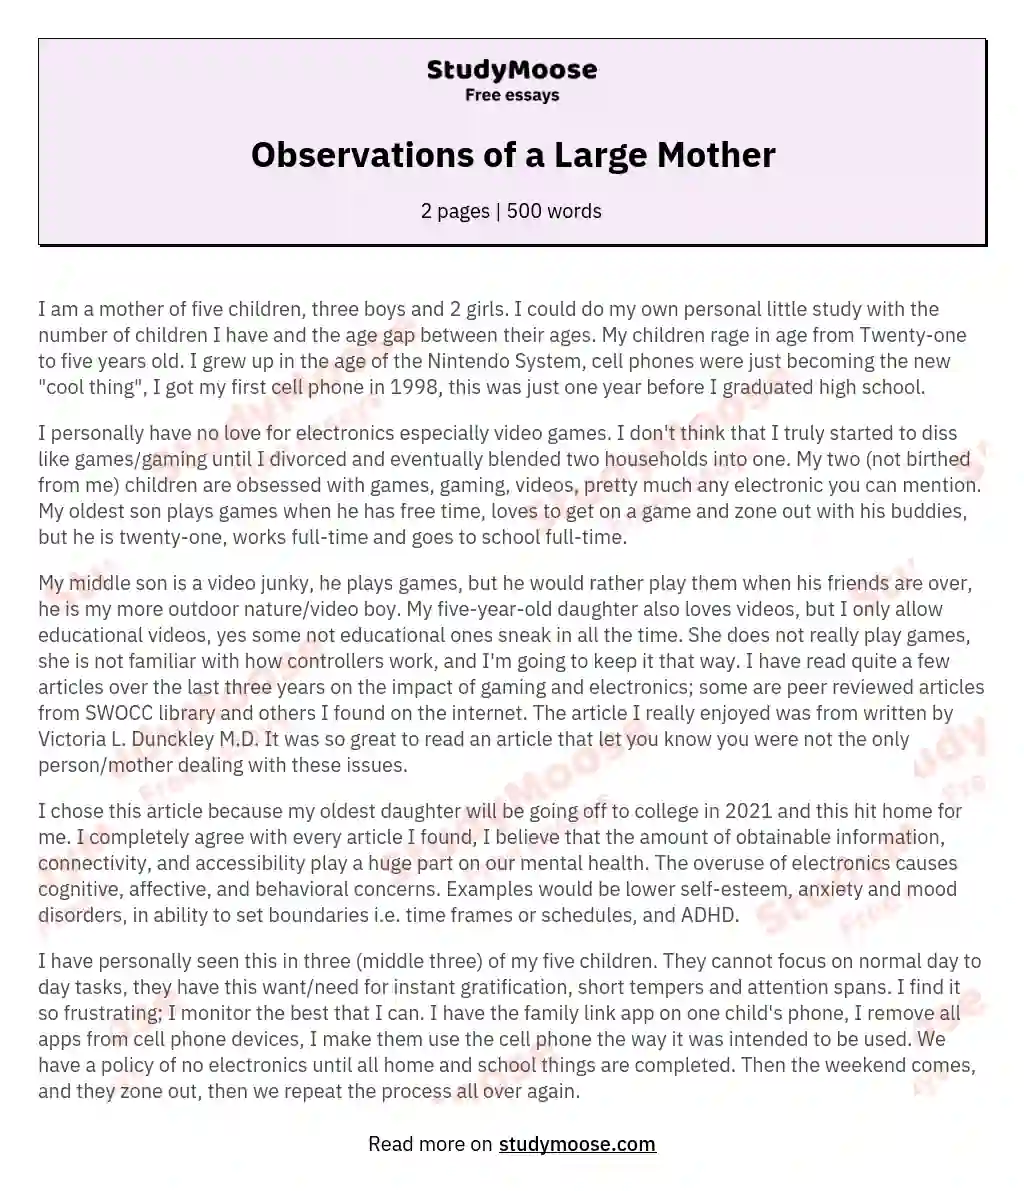 Observations of a Large Mother